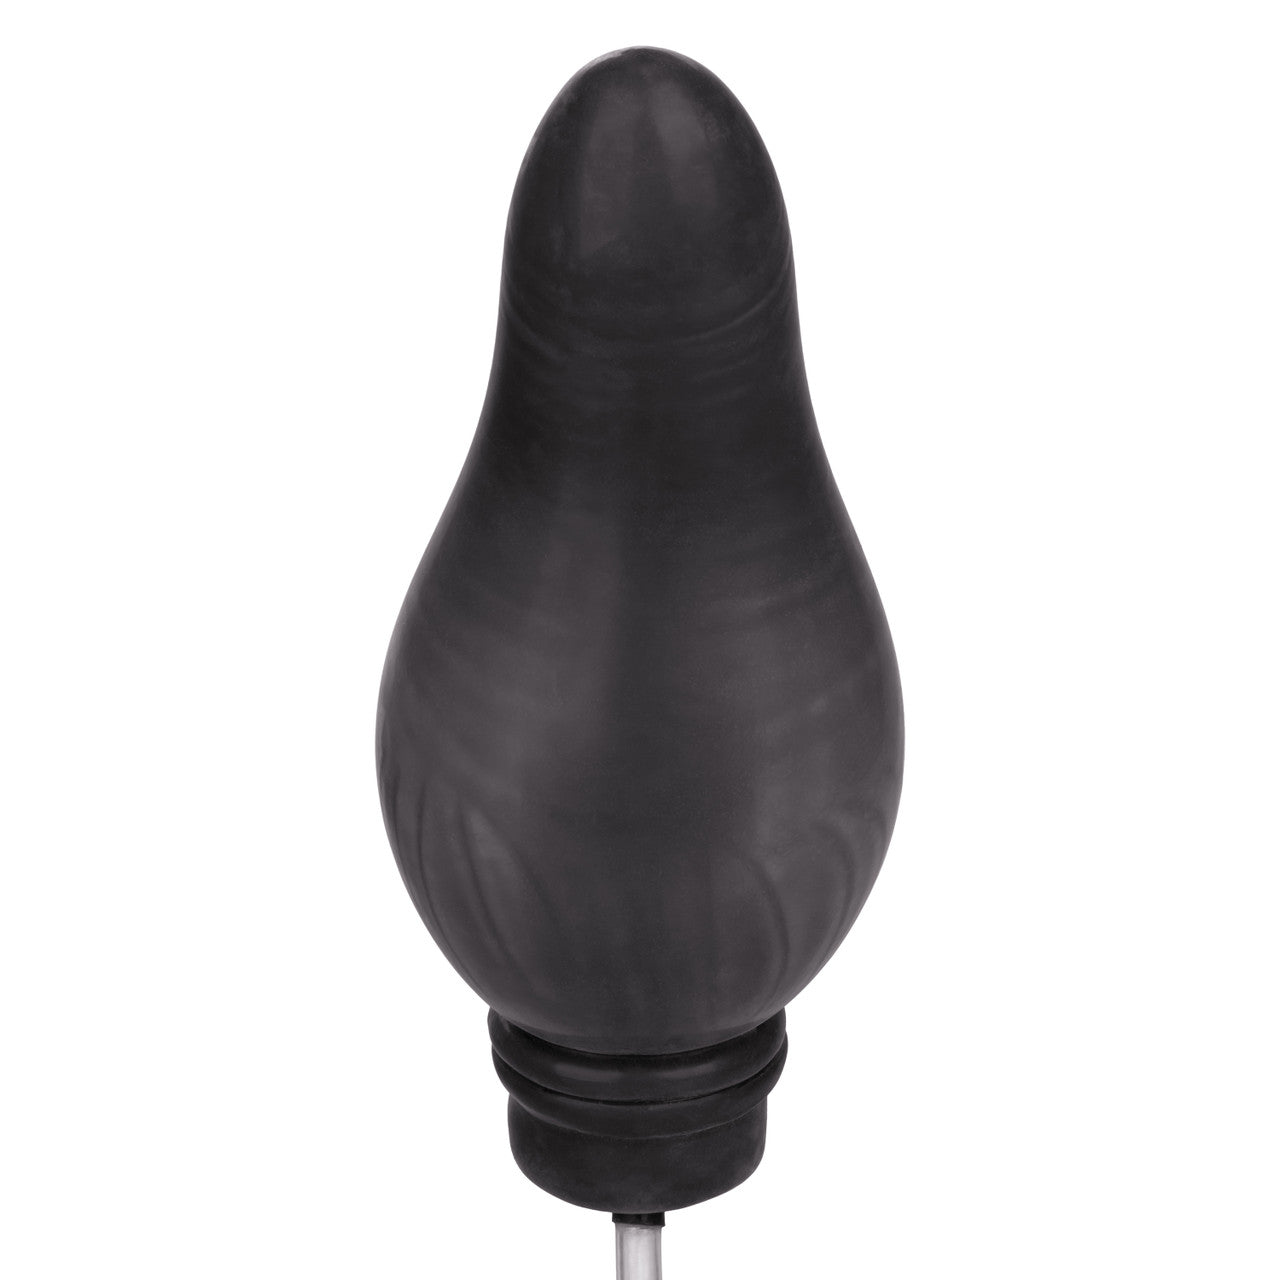 Colt Hefty Probe Inflatable Butt Plug - Black - Thorn & Feather Sex Toy Canada